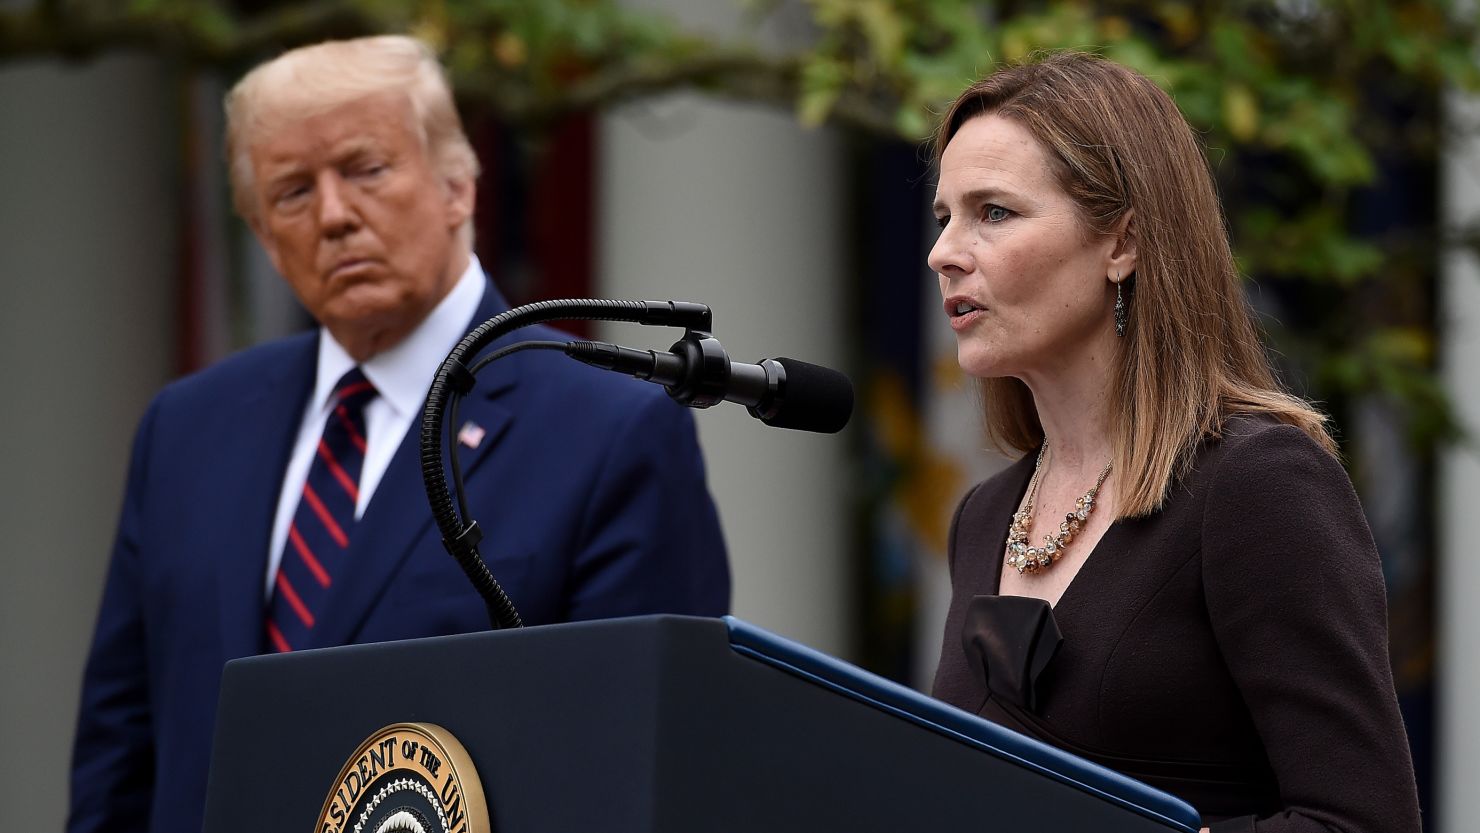 Judge Amy Coney Barrett speaks after being nominated to the US Supreme Court by President Donald Trump in the Rose Garden of the White House in Washington, DC on September 26, 2020. (Photo by OLIVIER DOULIERY/AFP via Getty Images)